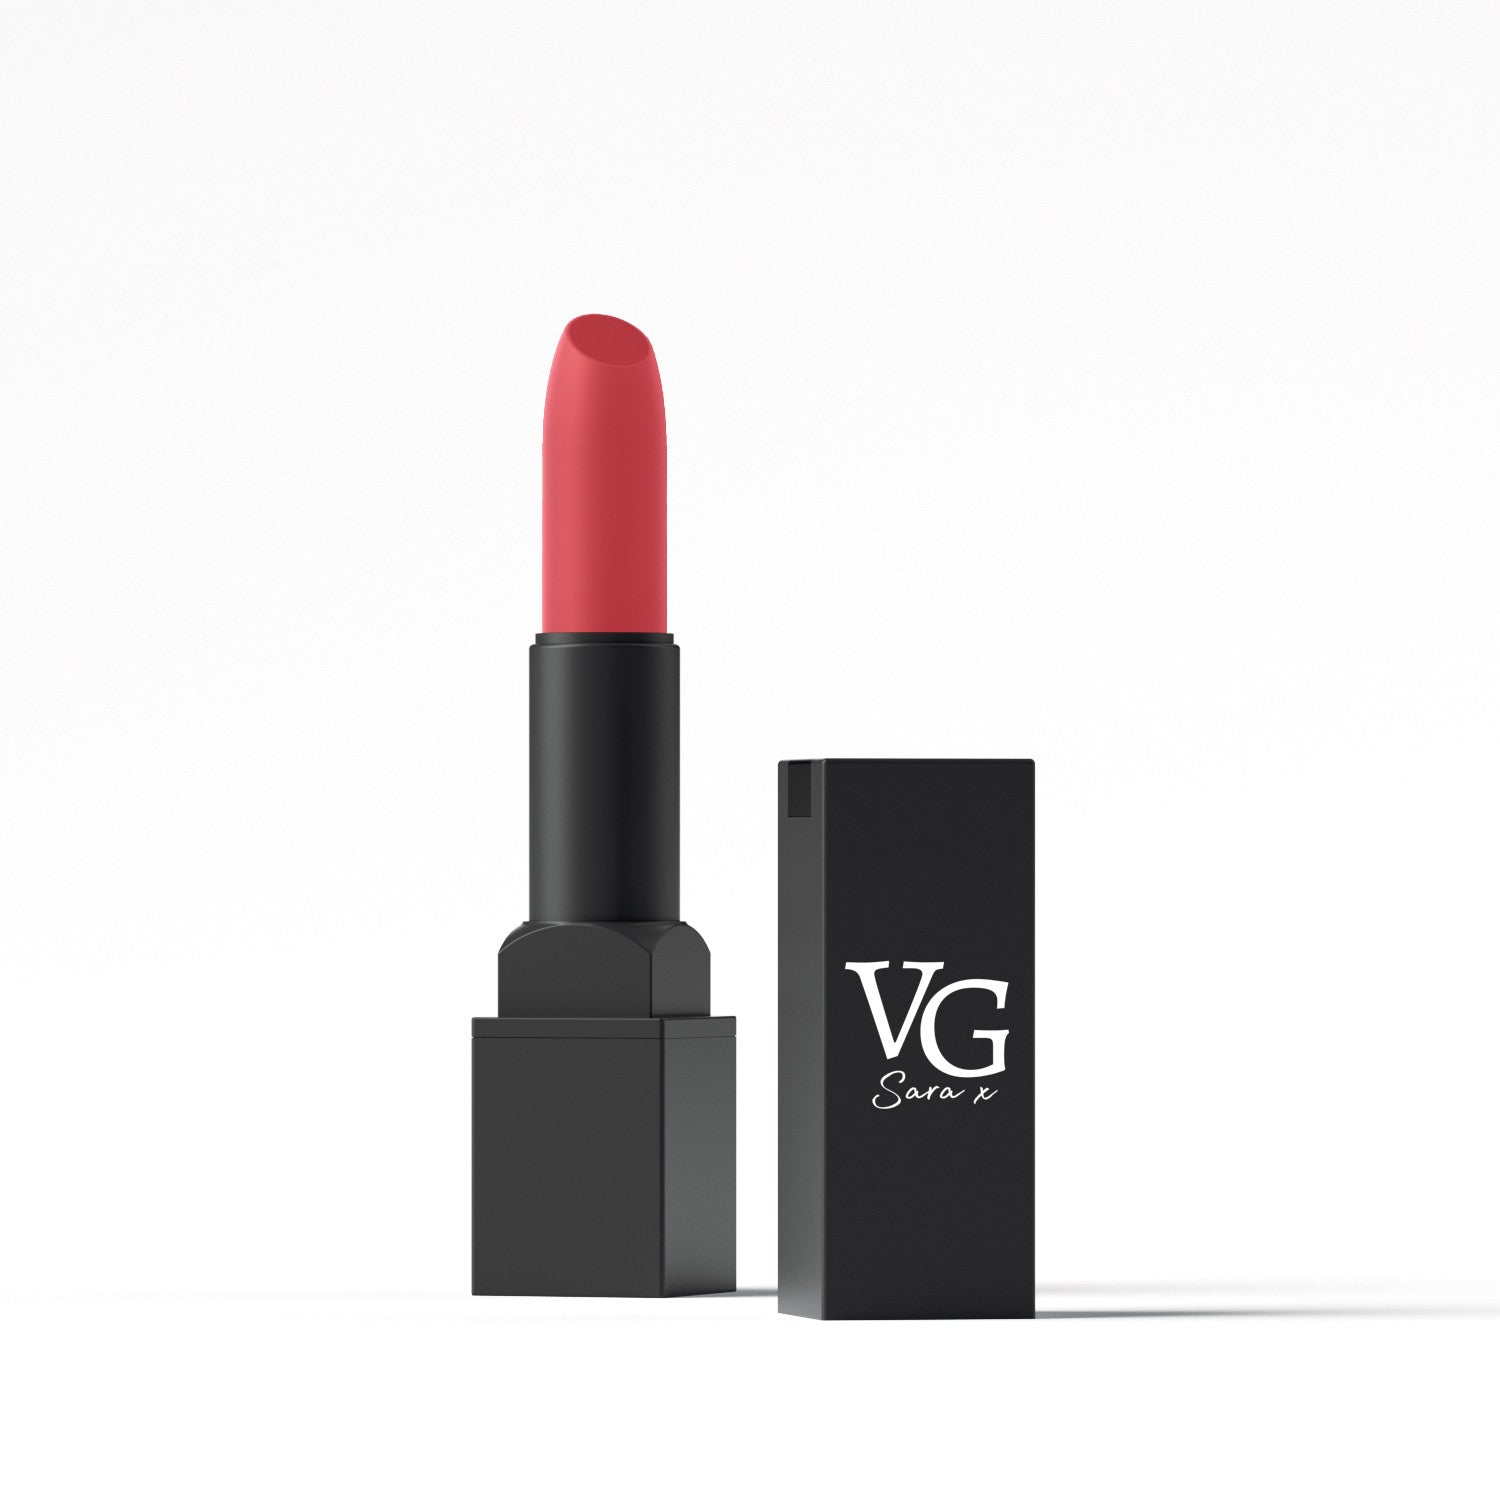 VG lipstick presented with its durable and sleek design